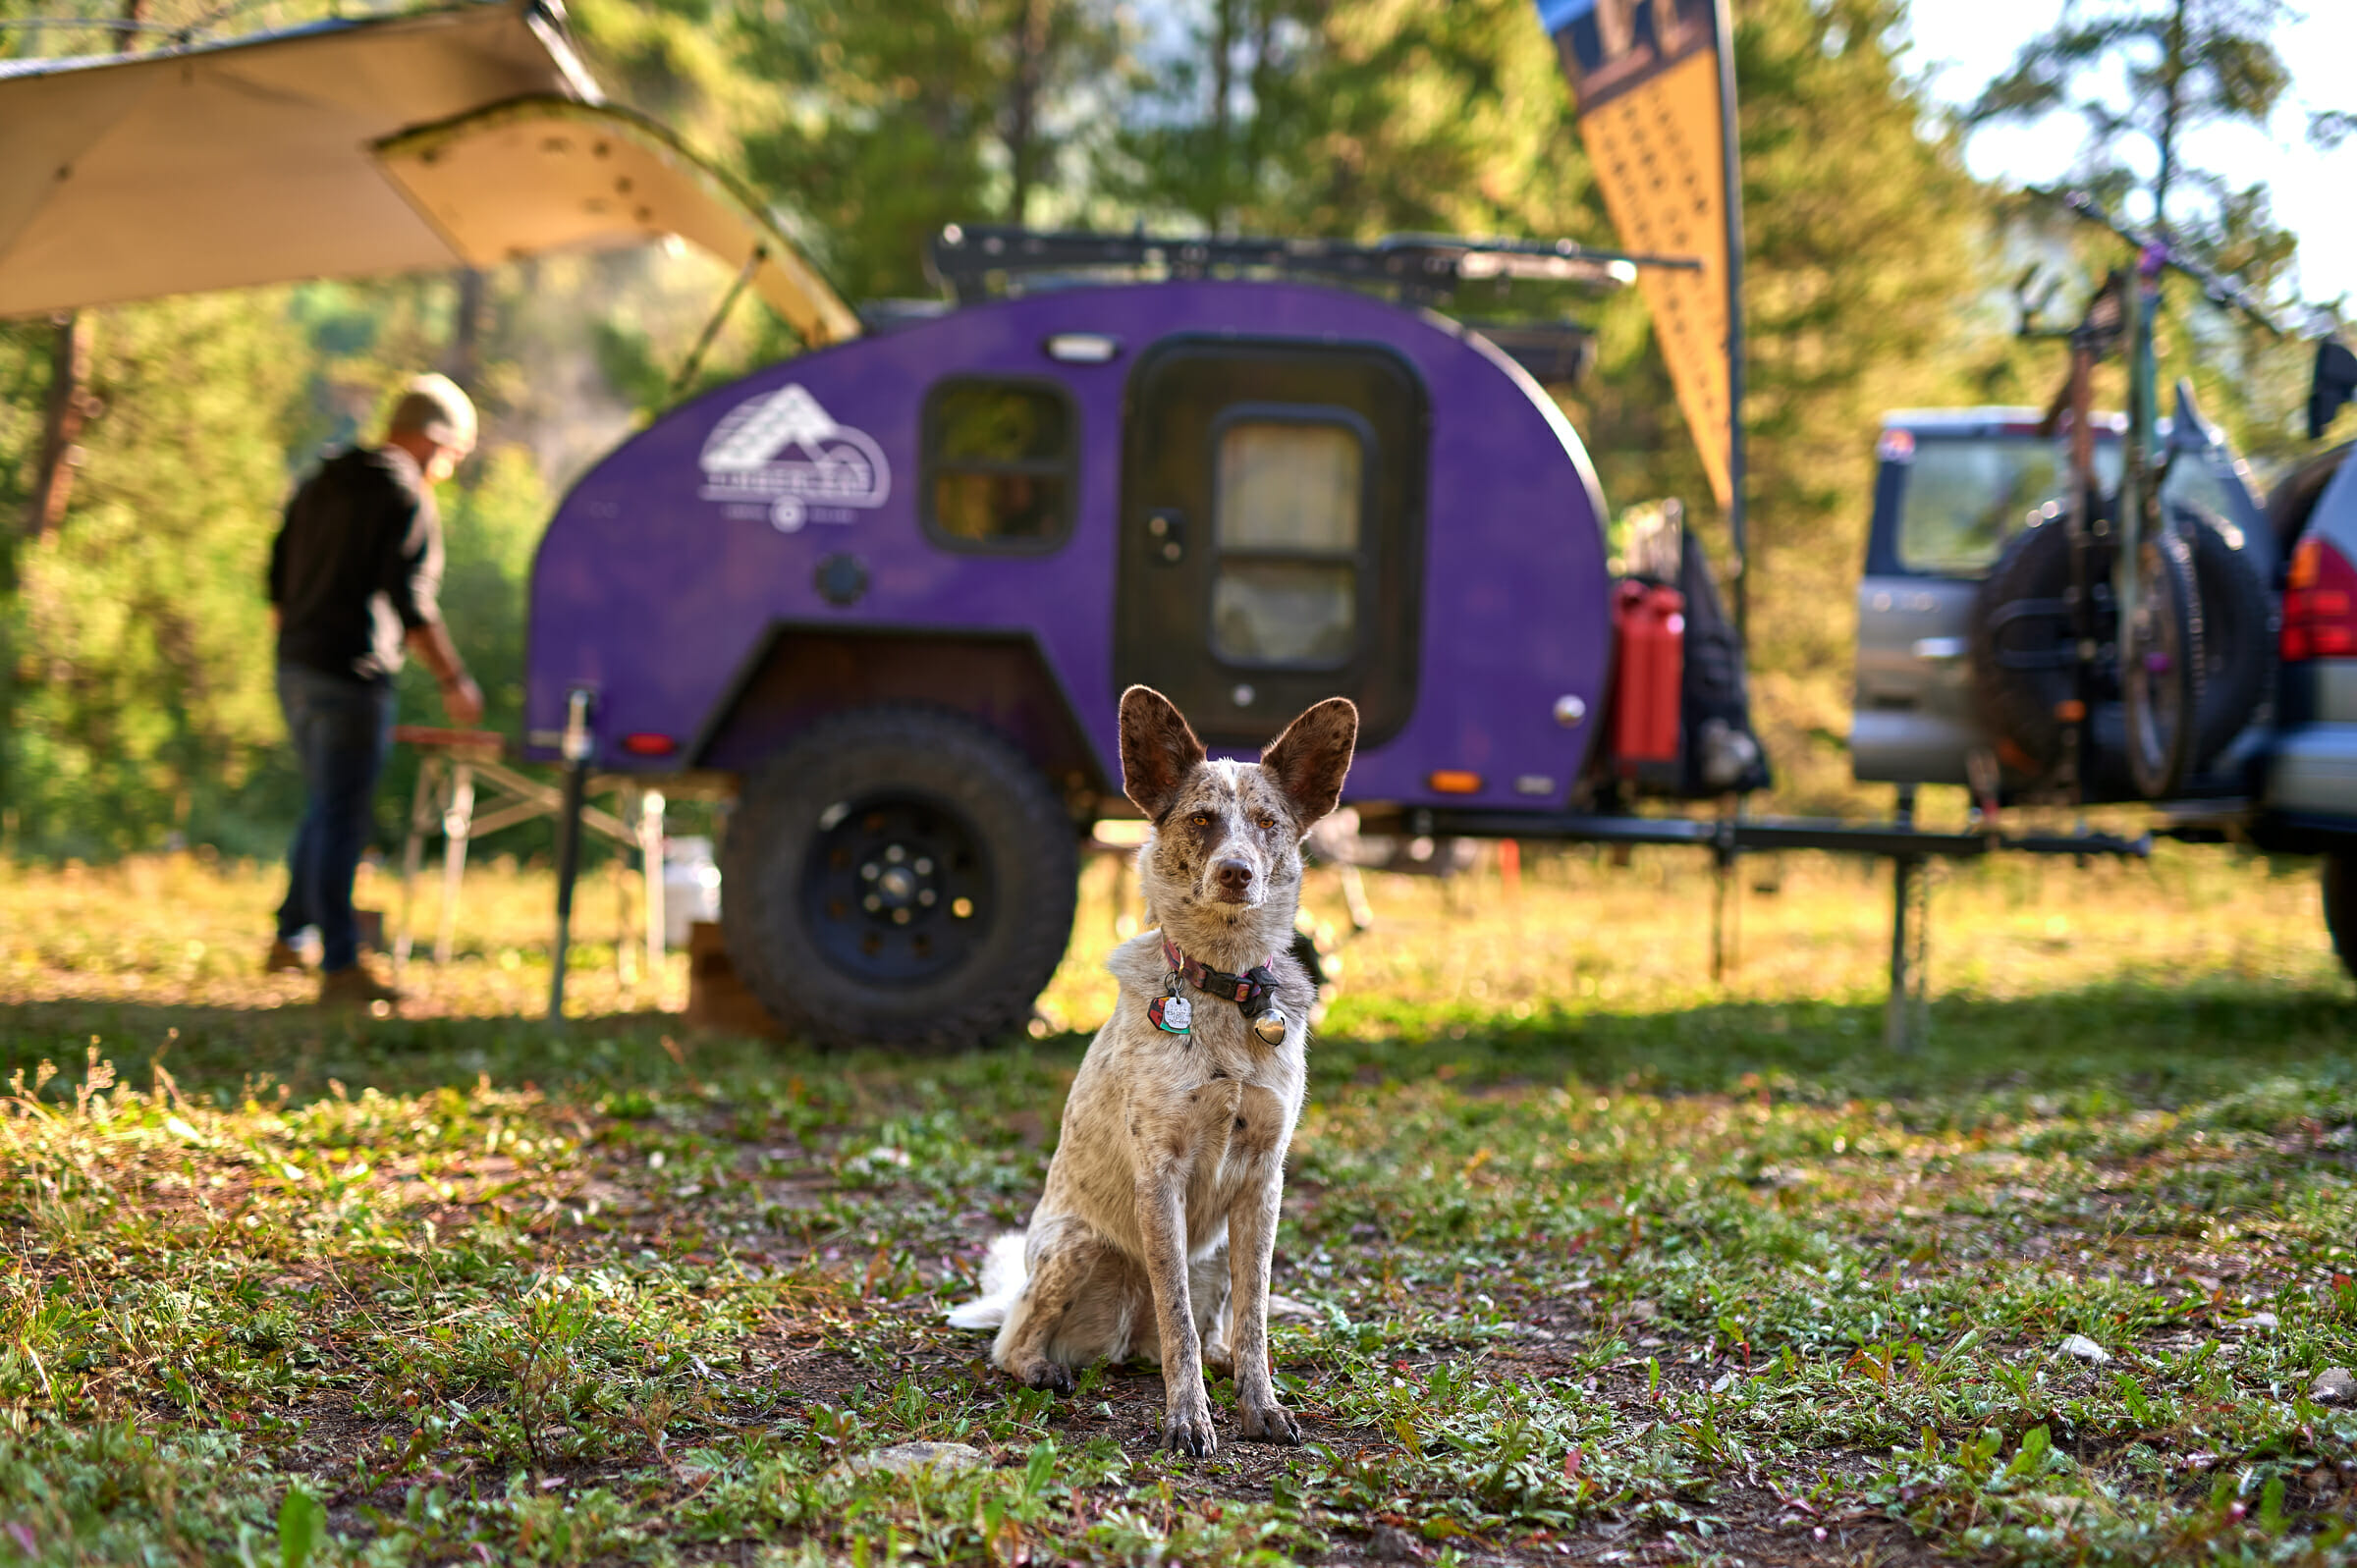 Camping With Dogs in A Teardrop Trailer